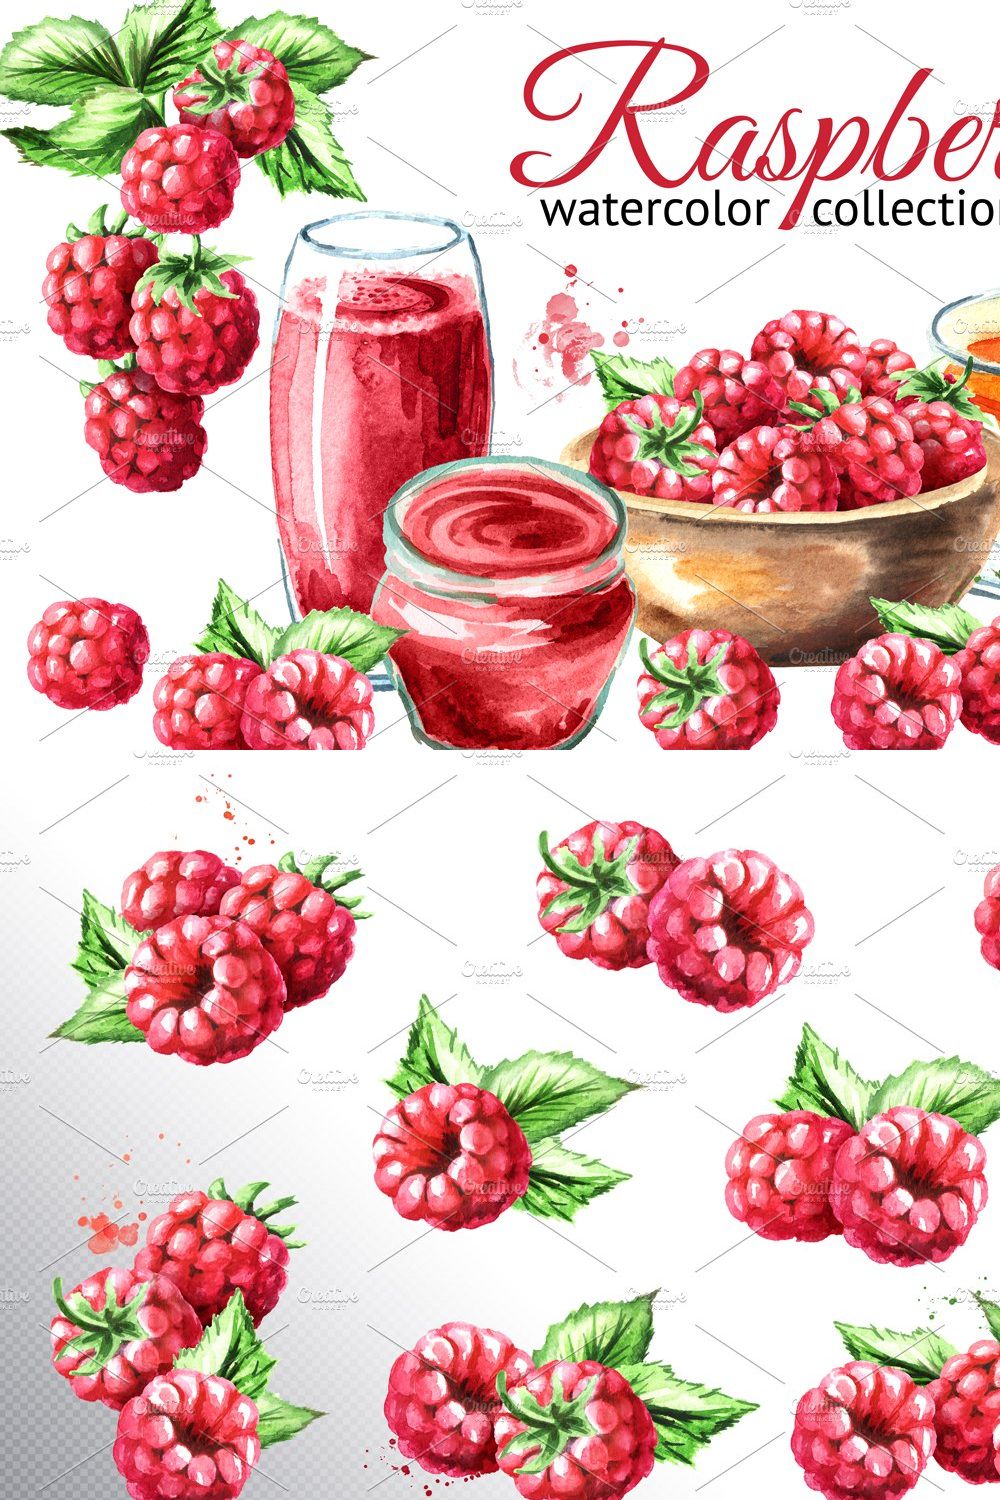 Raspberry. Watercolor collection pinterest preview image.